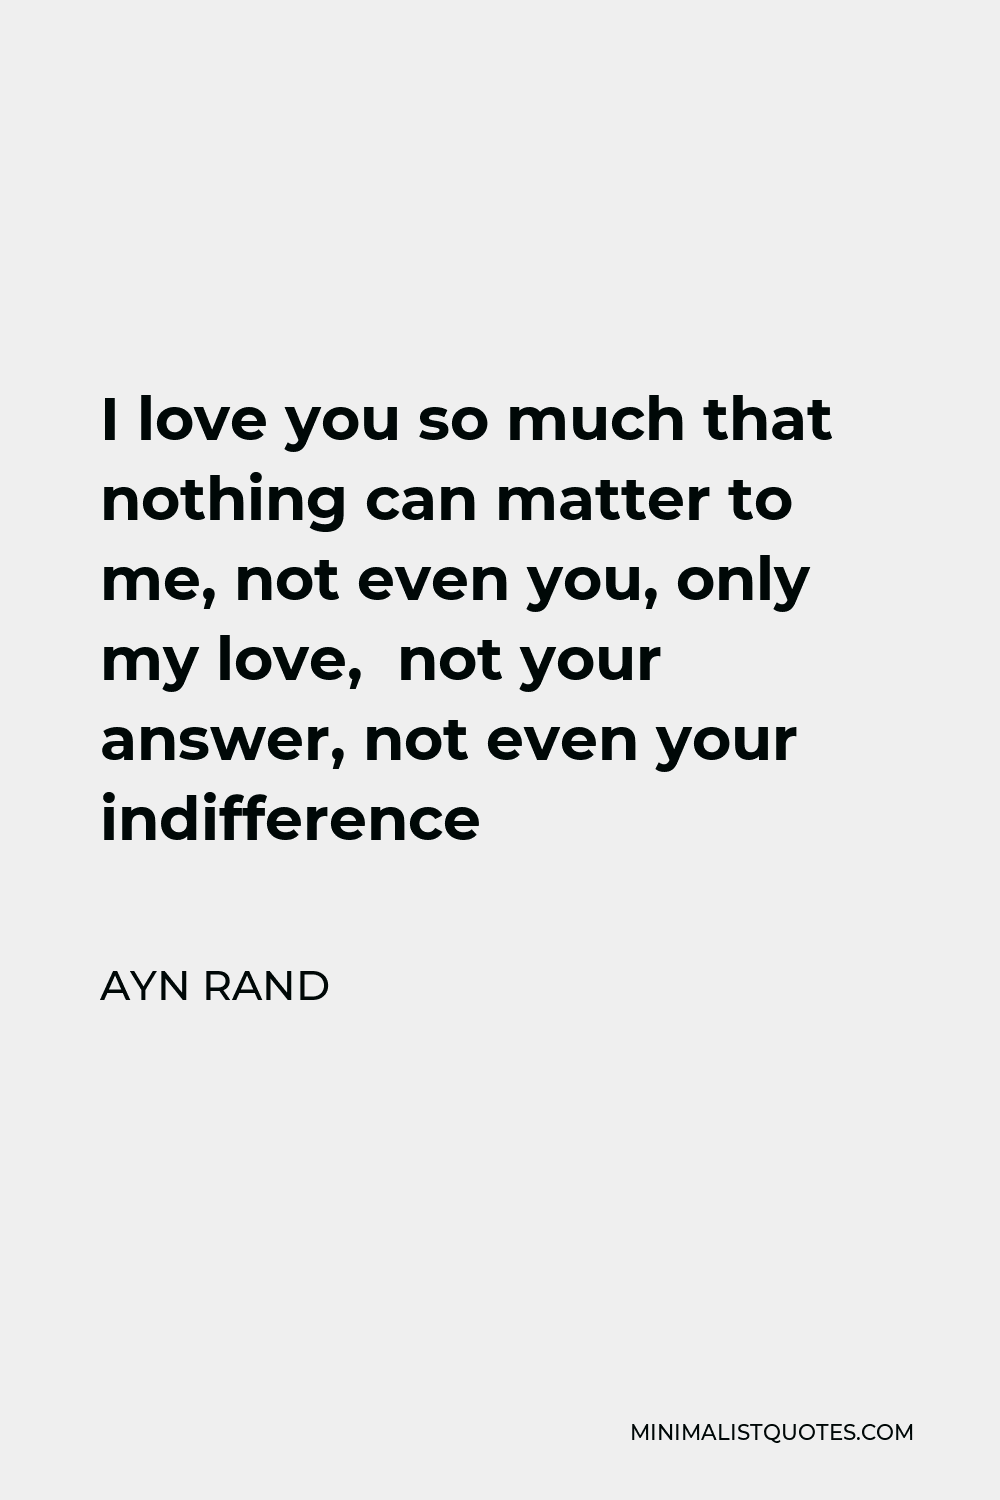 Ayn Rand Quote - I love you so much that nothing can matter to me, not even you, only my love, not your answer, not even your indifference